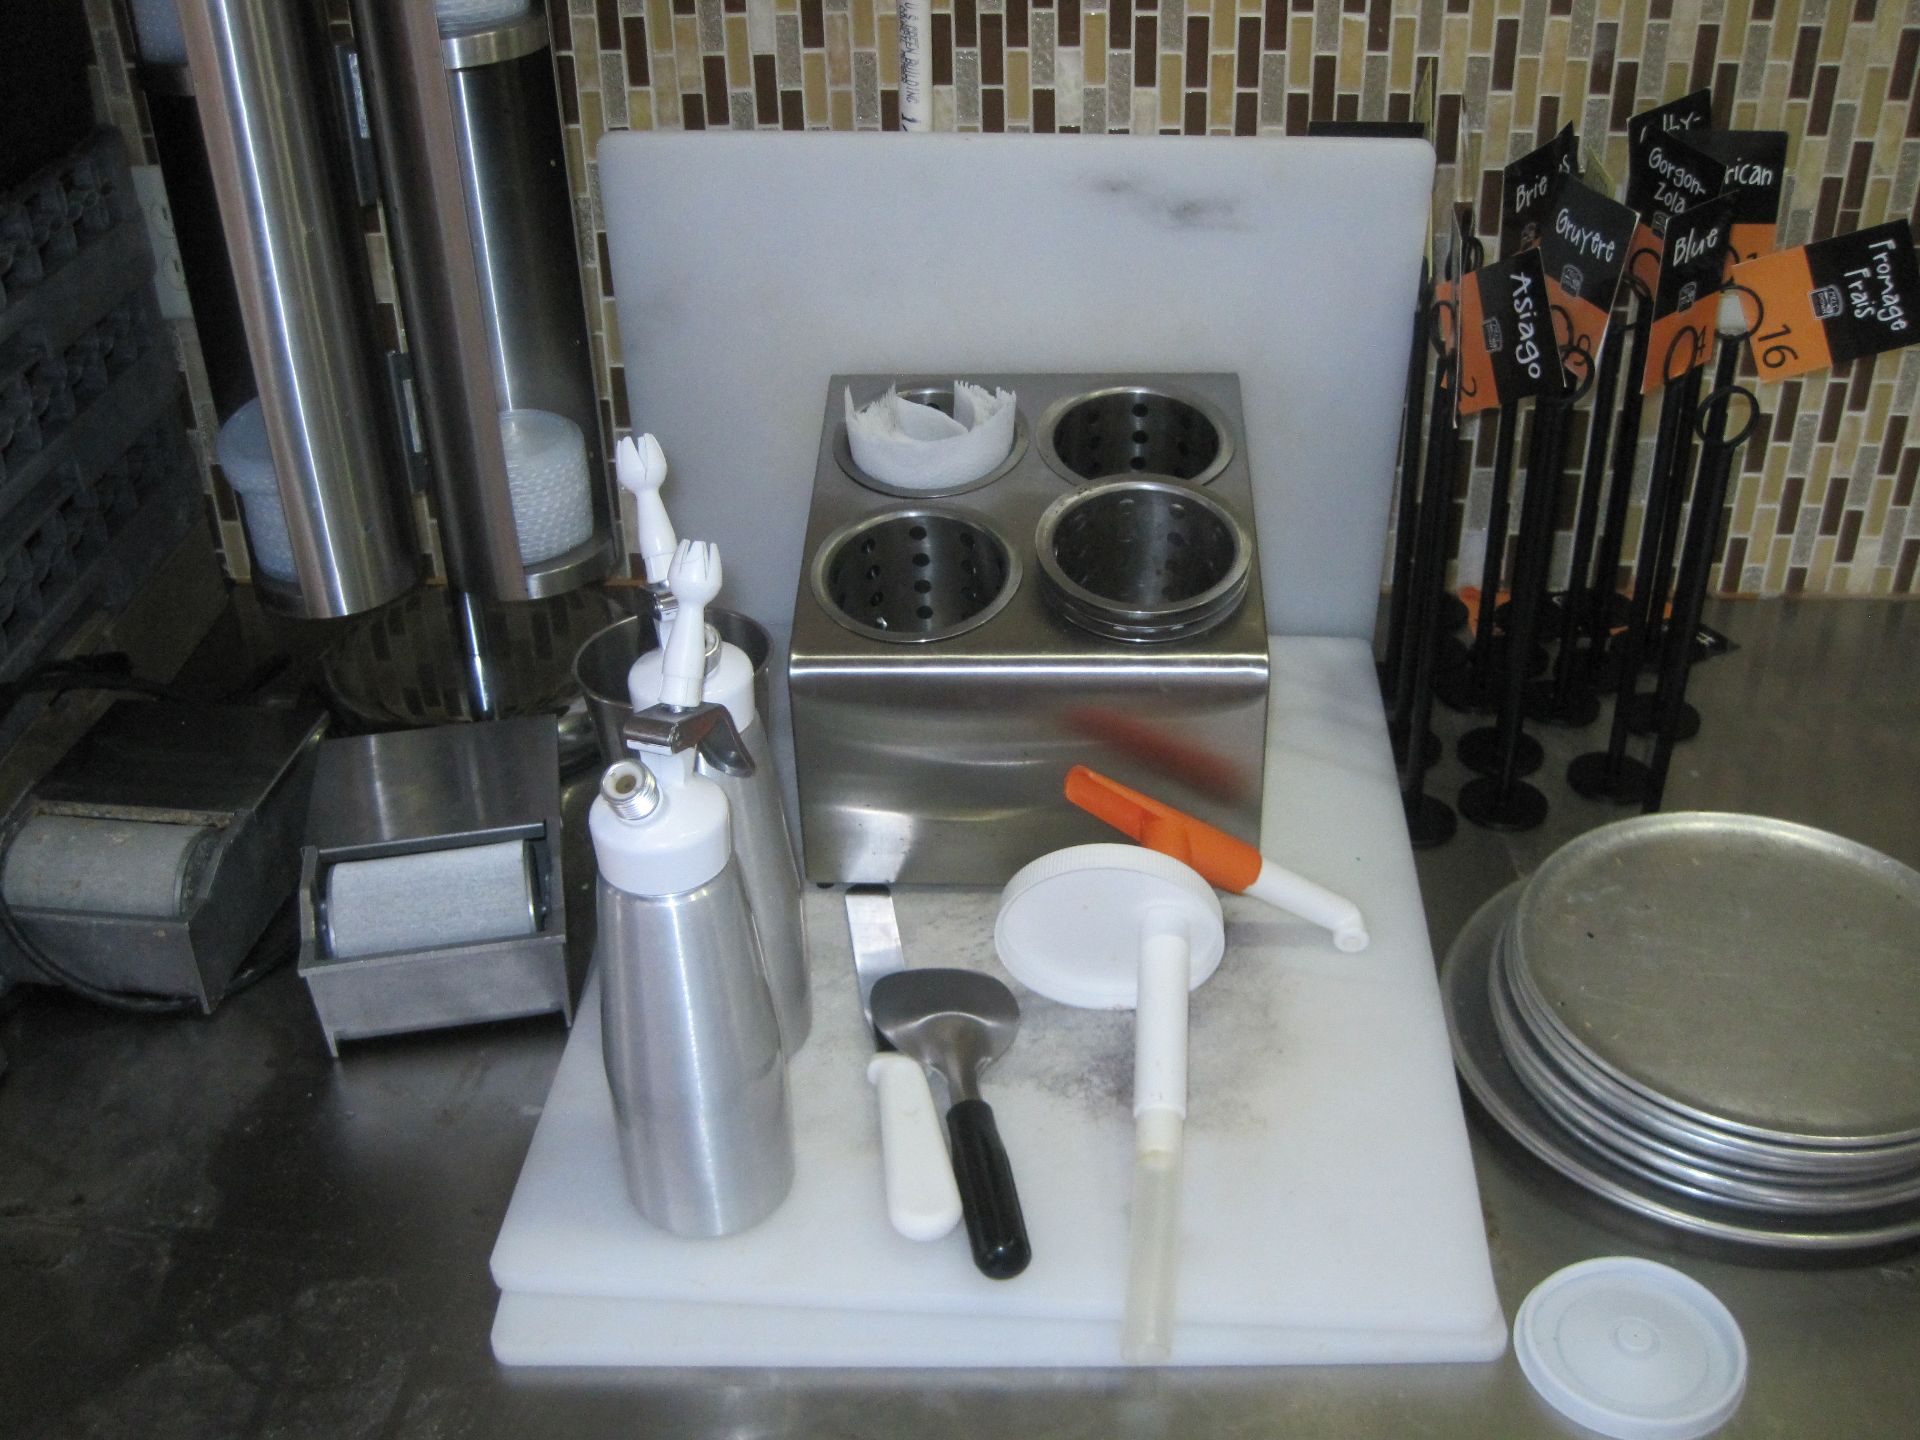 Kitchen Equipment Comprising of: Plastic Bins, S.S. Dispenser, Lid Holder, Cutting Boards, Whip - Image 2 of 2